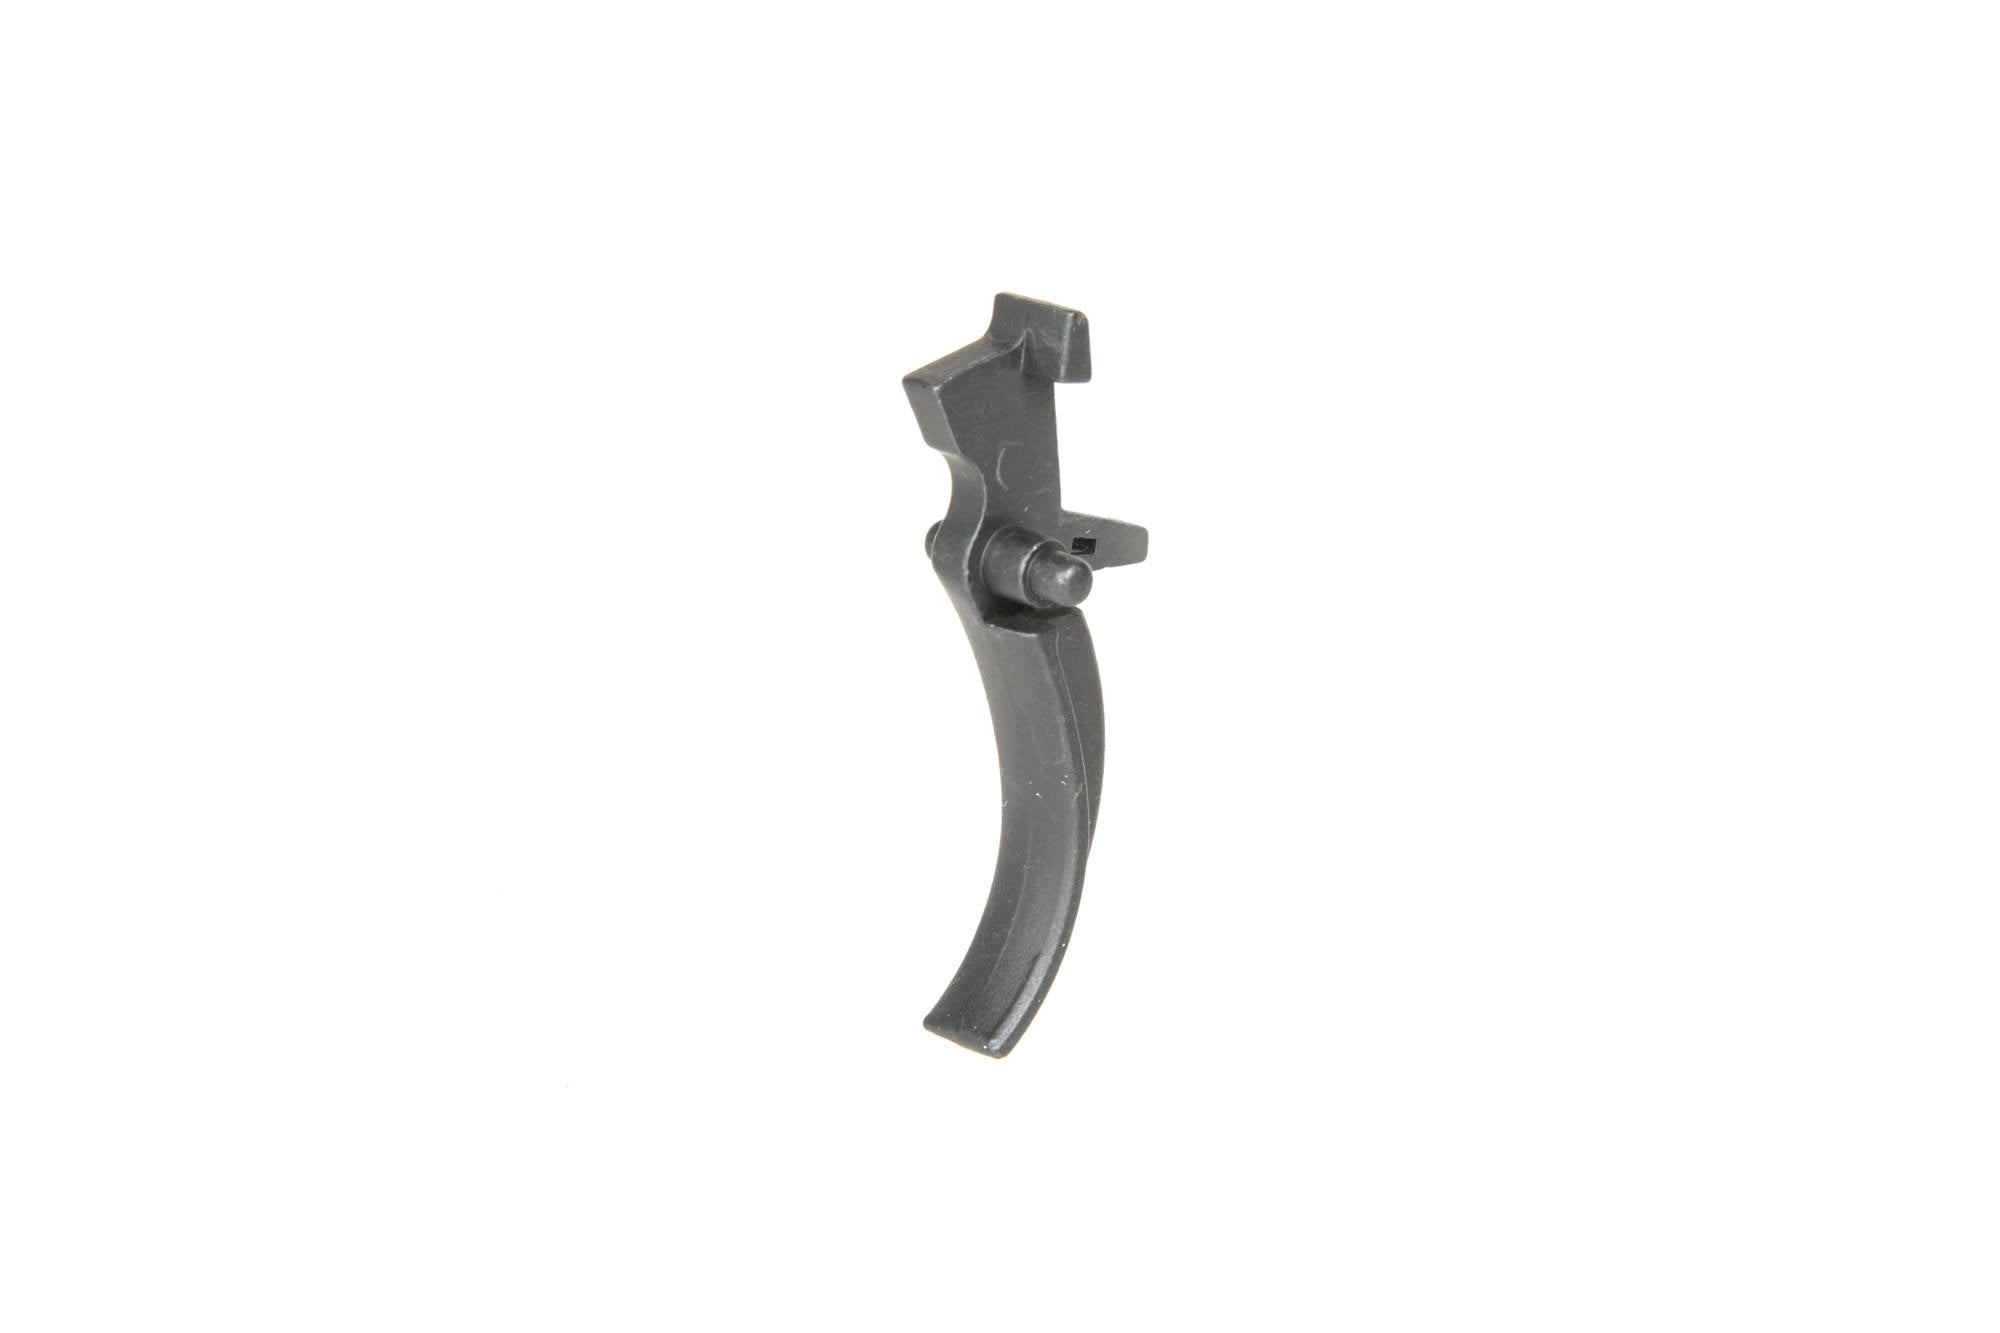 Reinforced steel trigger for m4/m16 type replicas